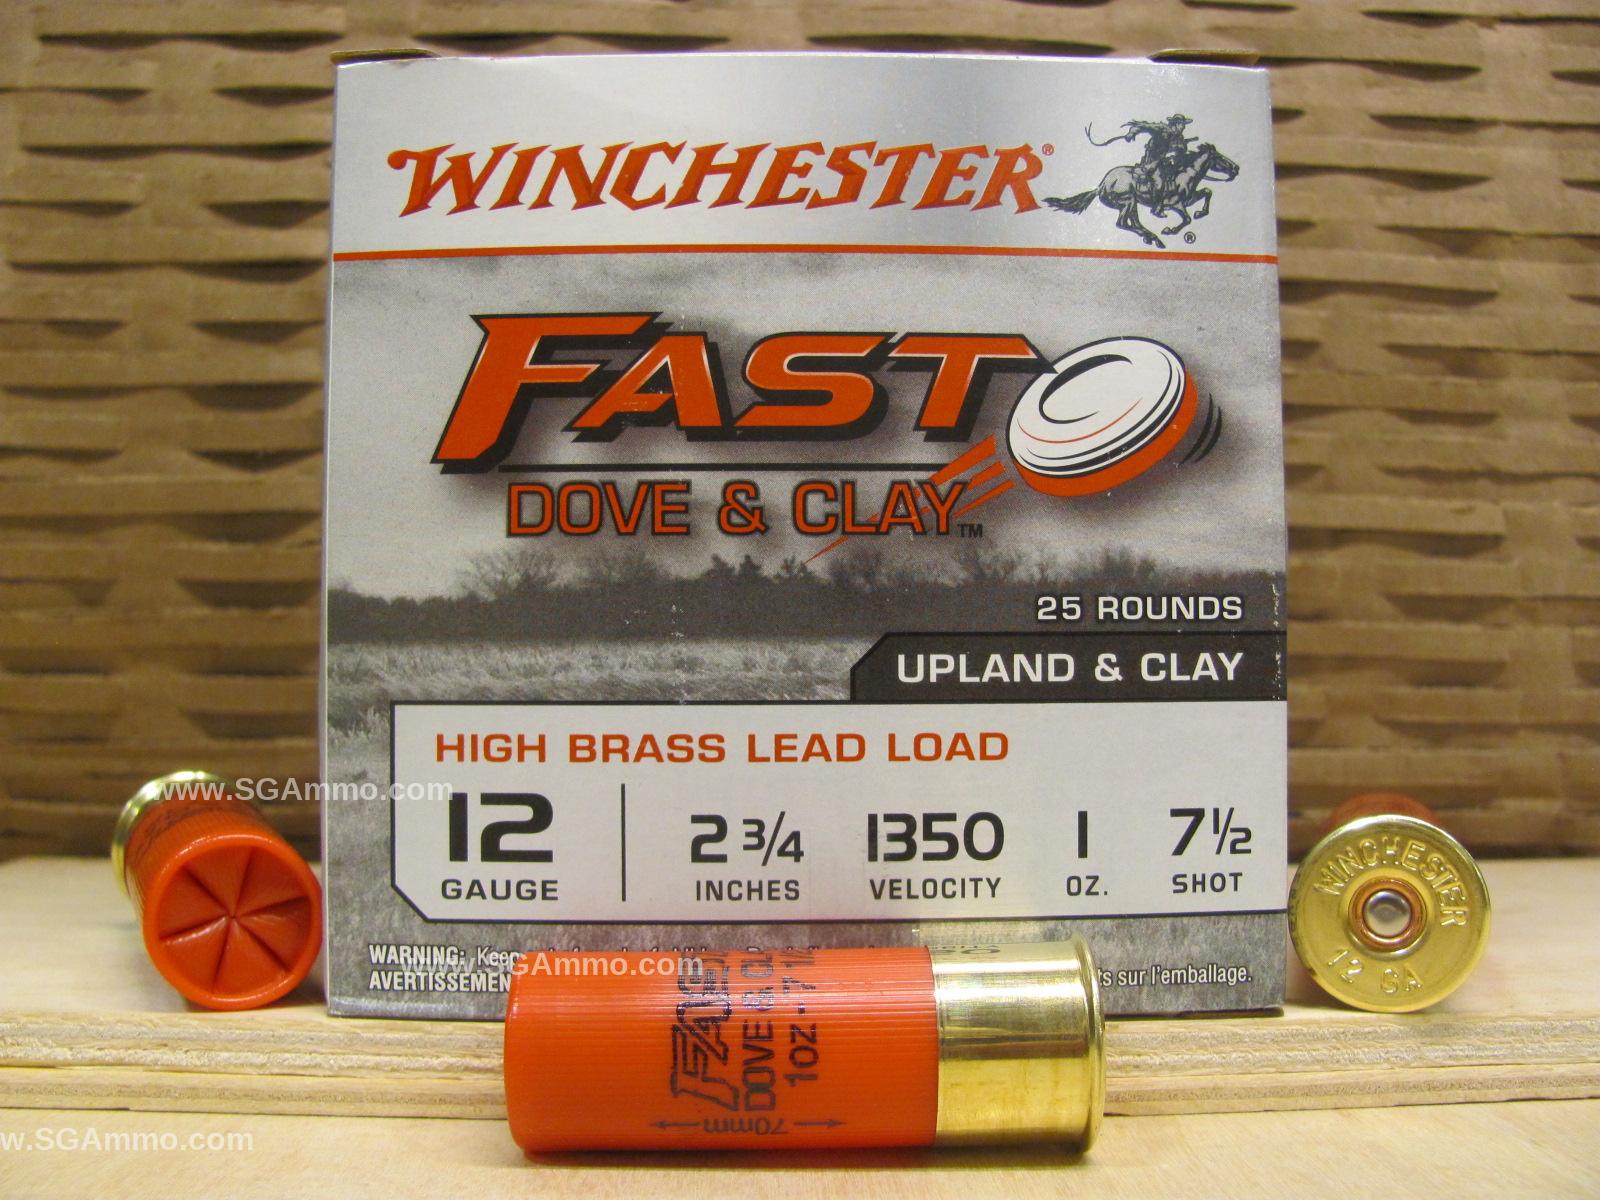 25 Round Box - 12 Gauge 2.75 Inch 1 Ounce Number 6 Shot Winchester